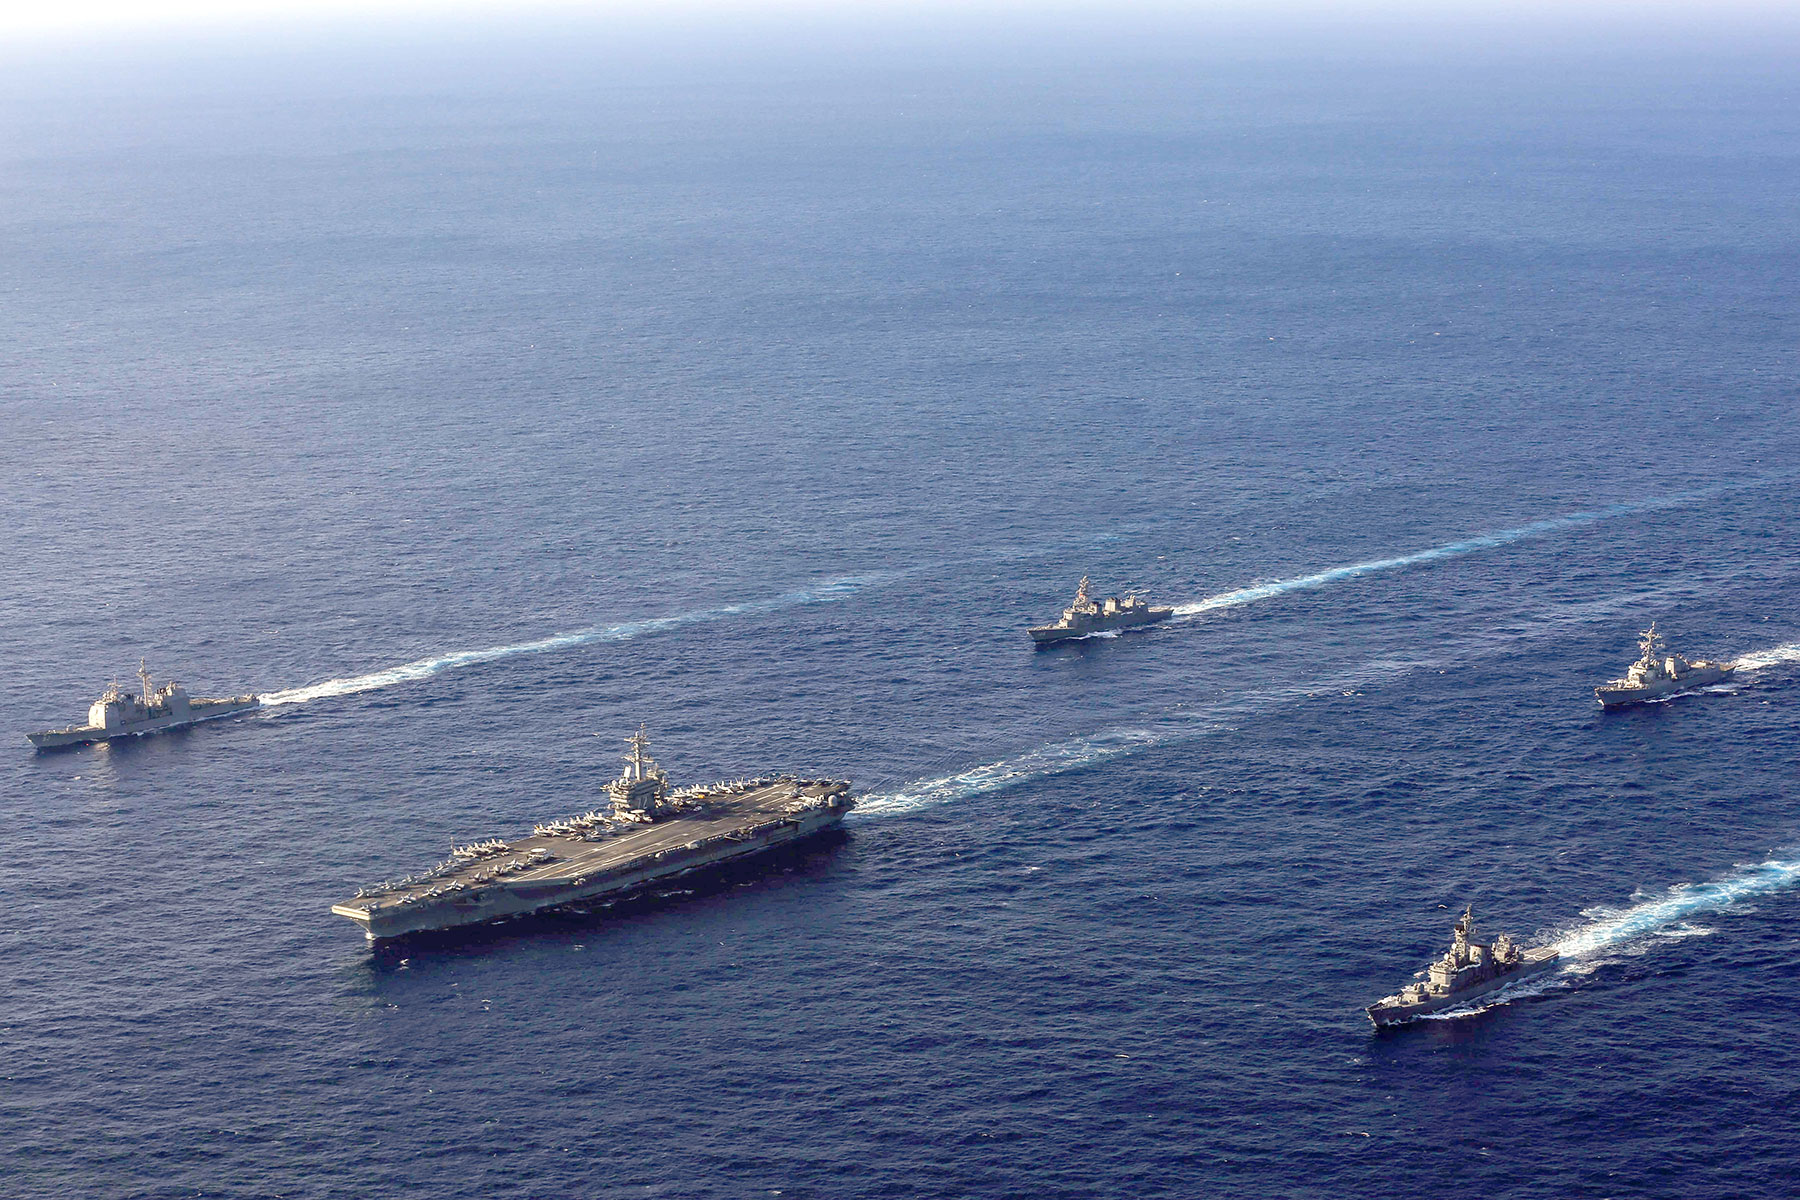 An image of the ocean and a fleet of Navy ships, one very large ship and four small ones moving in the water what appears at full speed.